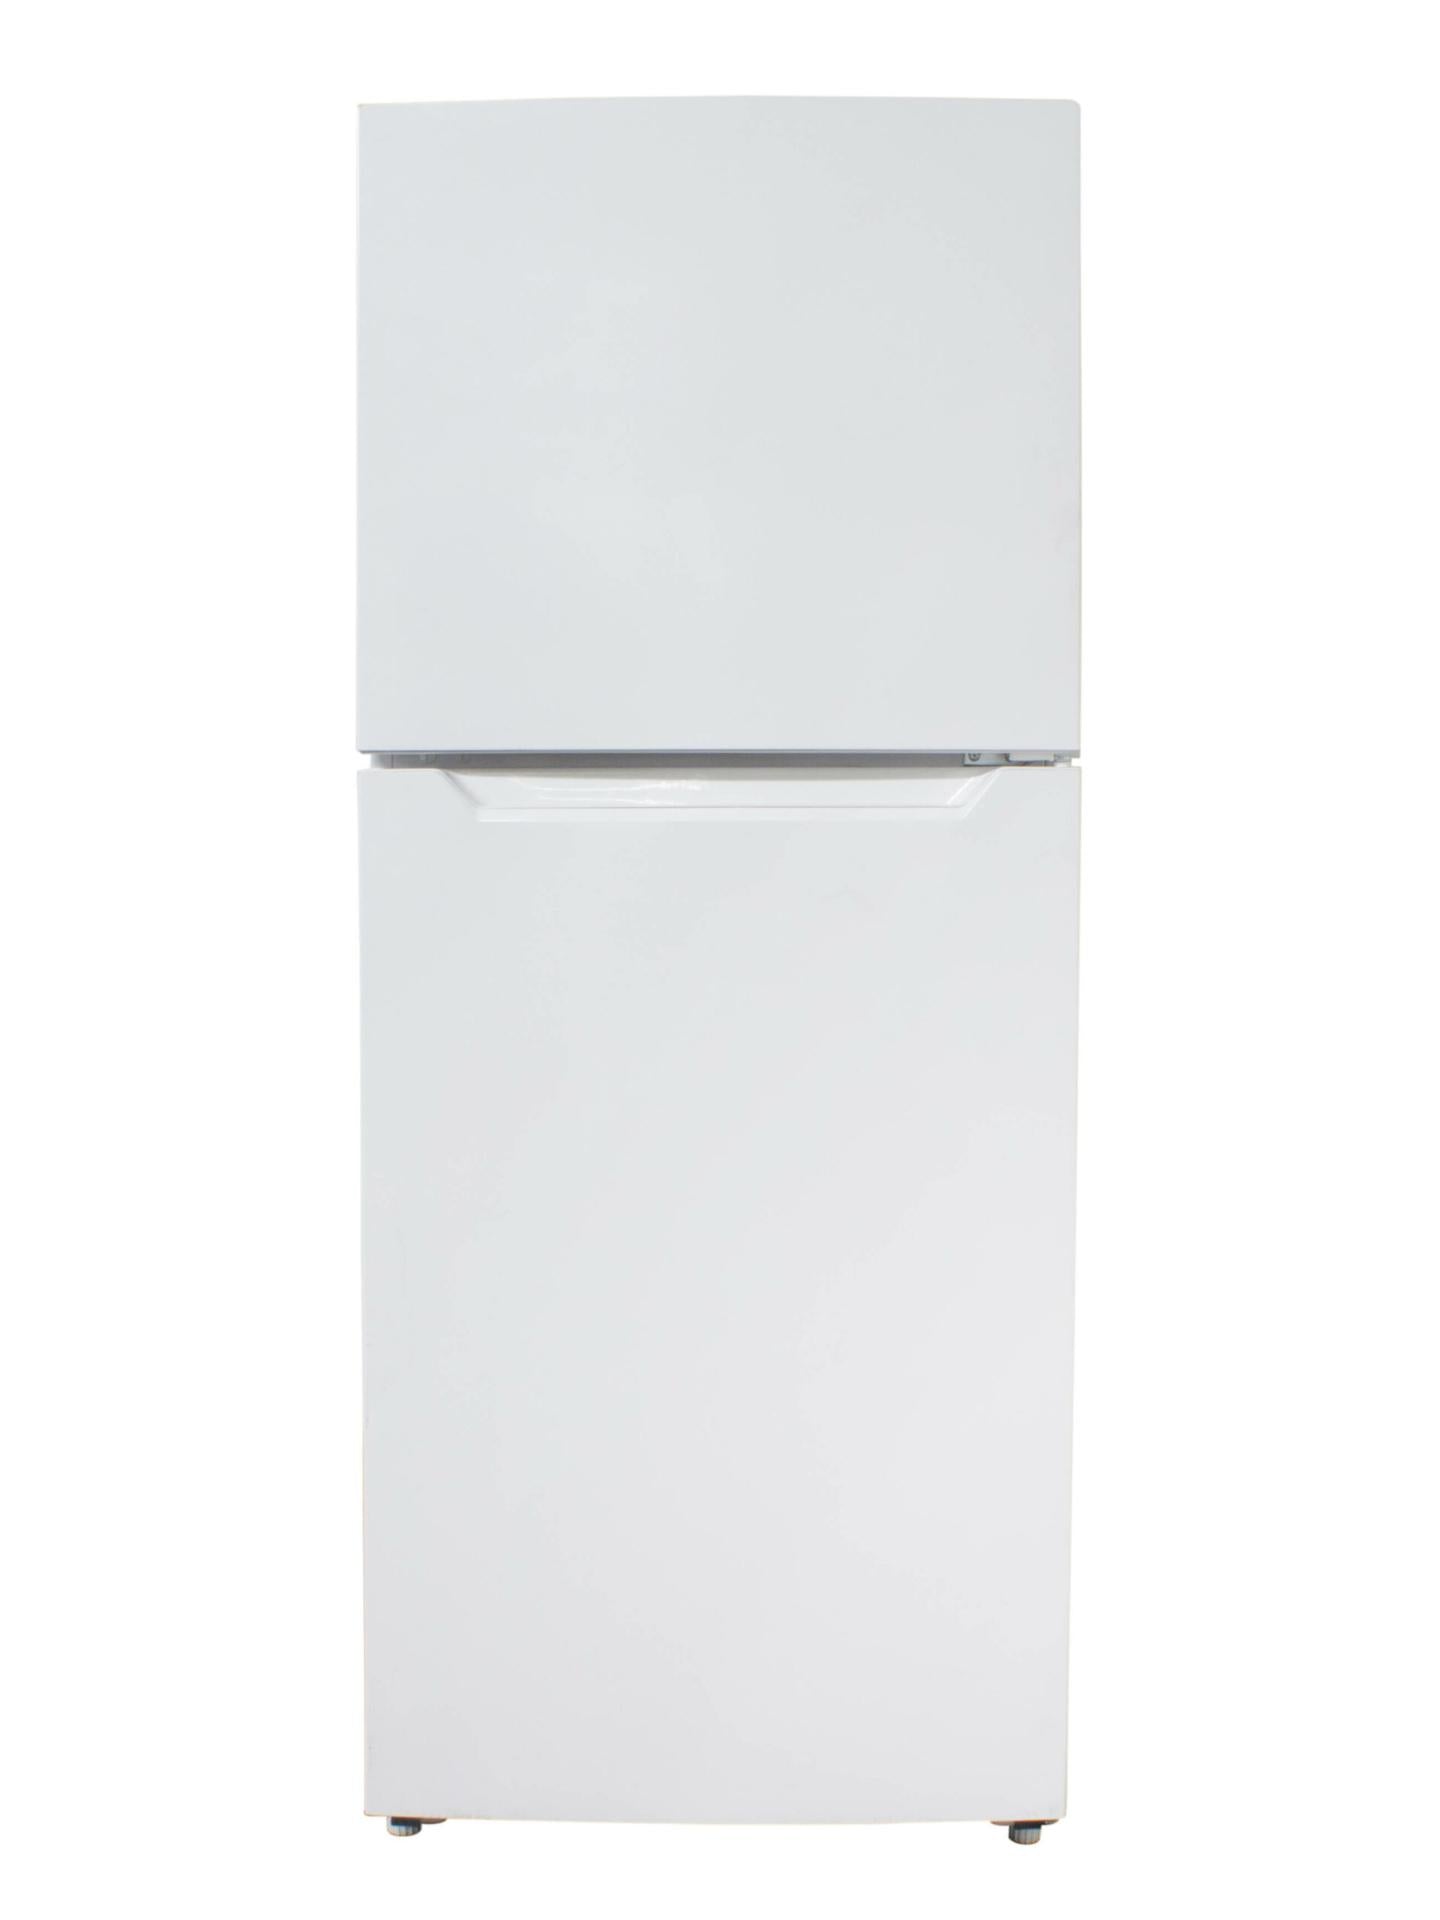 Danby 11.6 cu. ft. Apartment Size Fridge Top Mount in White